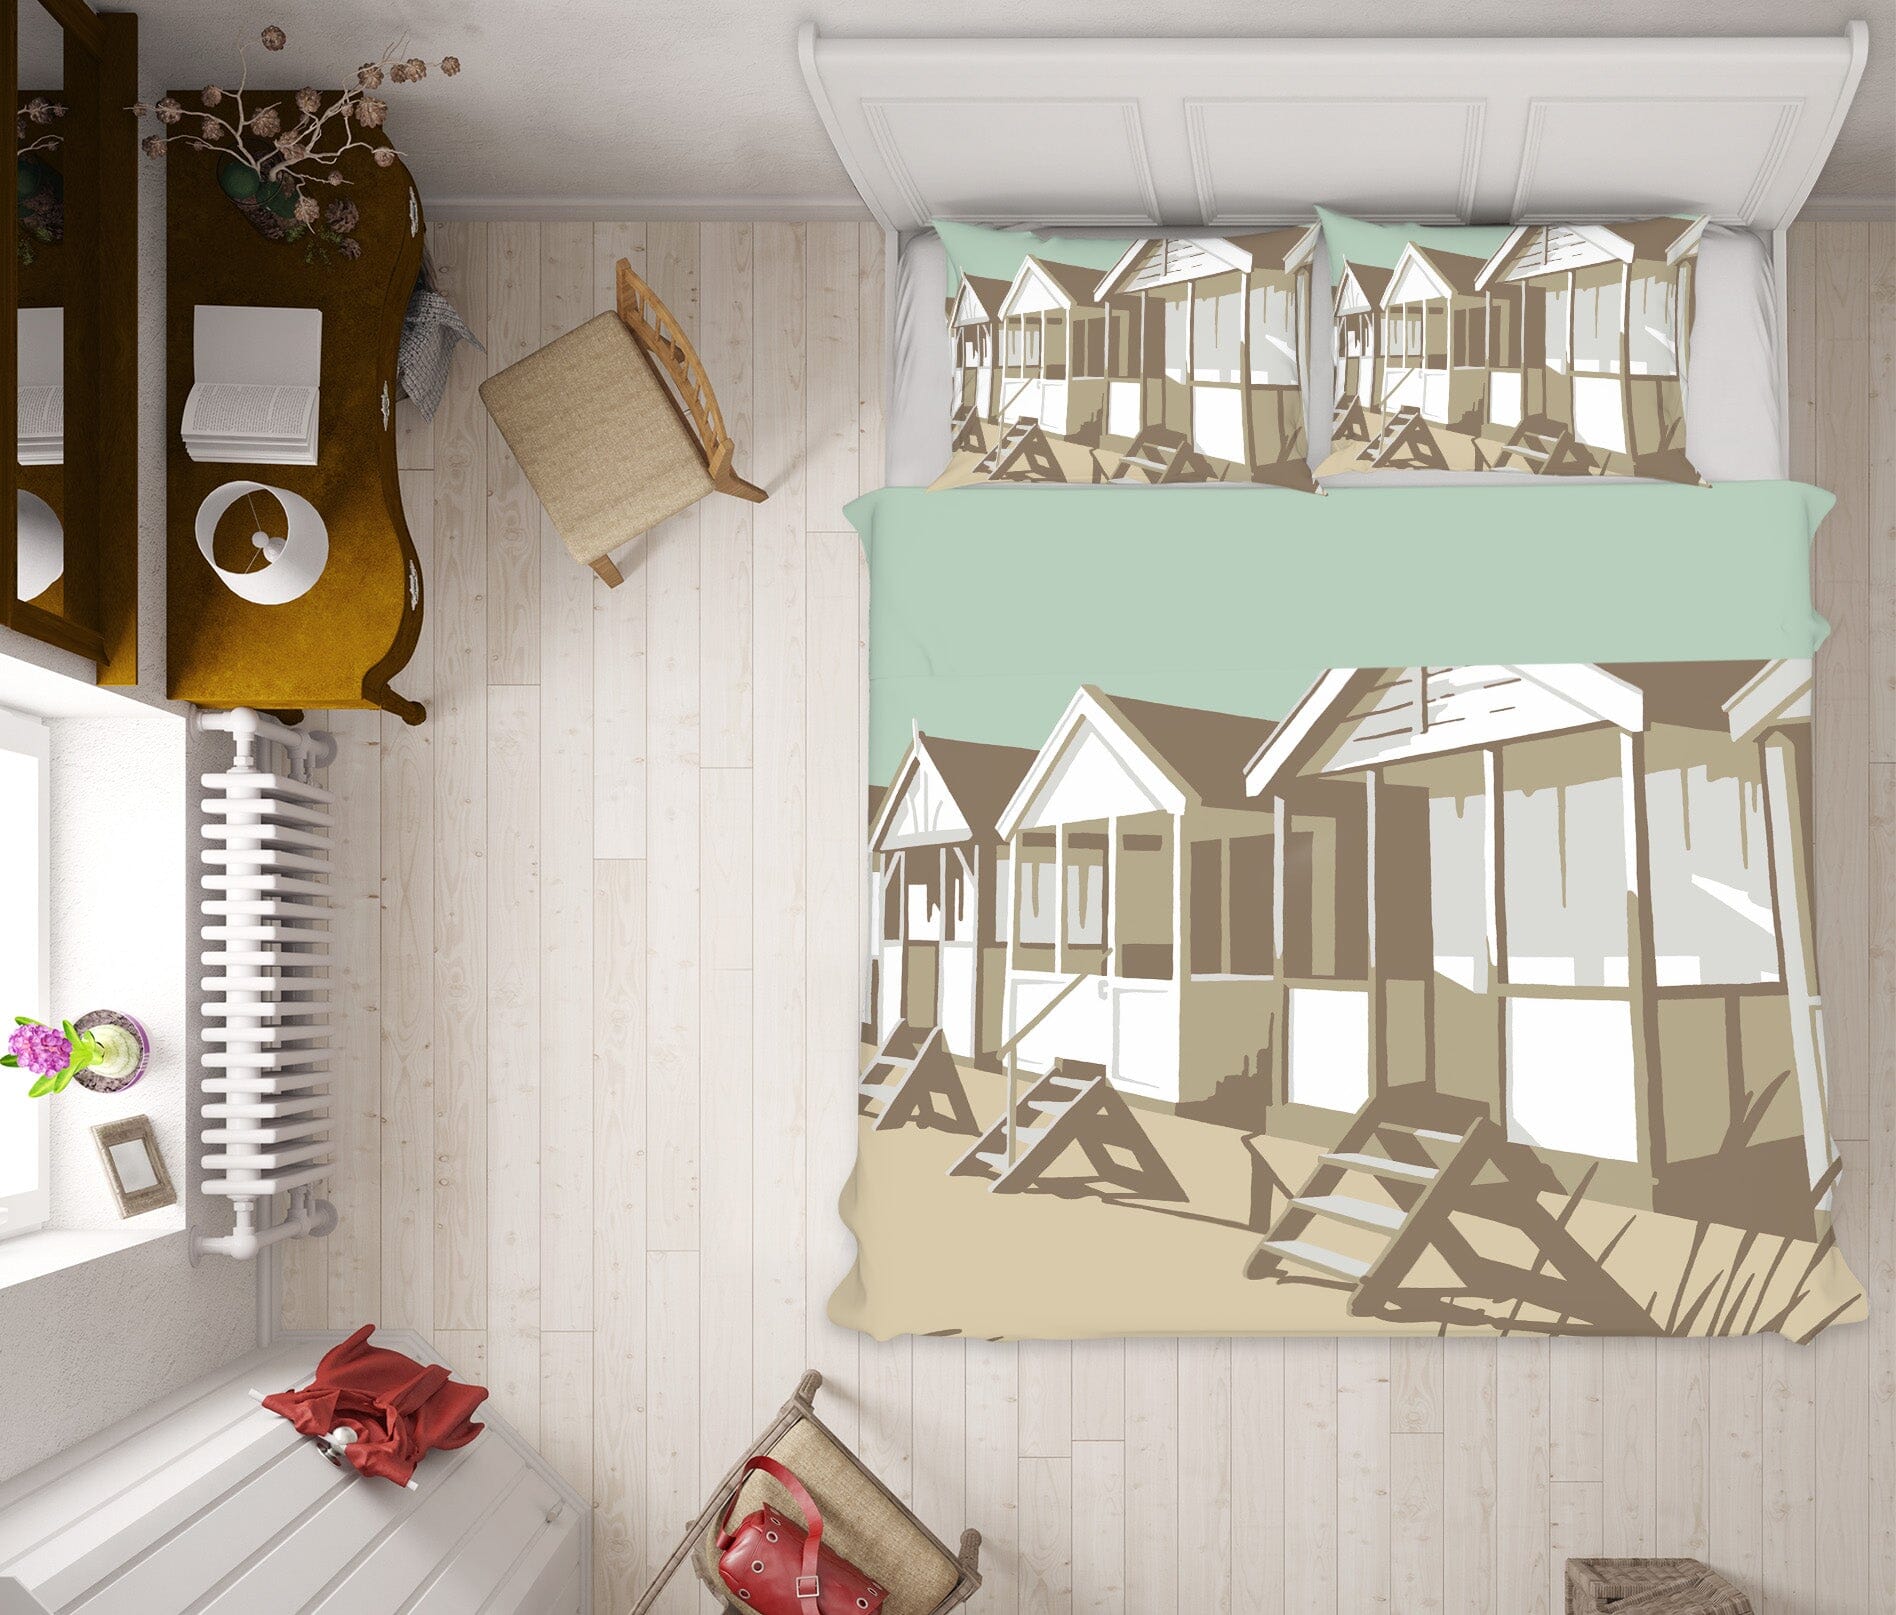 3D Southwold Huts 2062 Steve Read Bedding Bed Pillowcases Quilt Quiet Covers AJ Creativity Home 